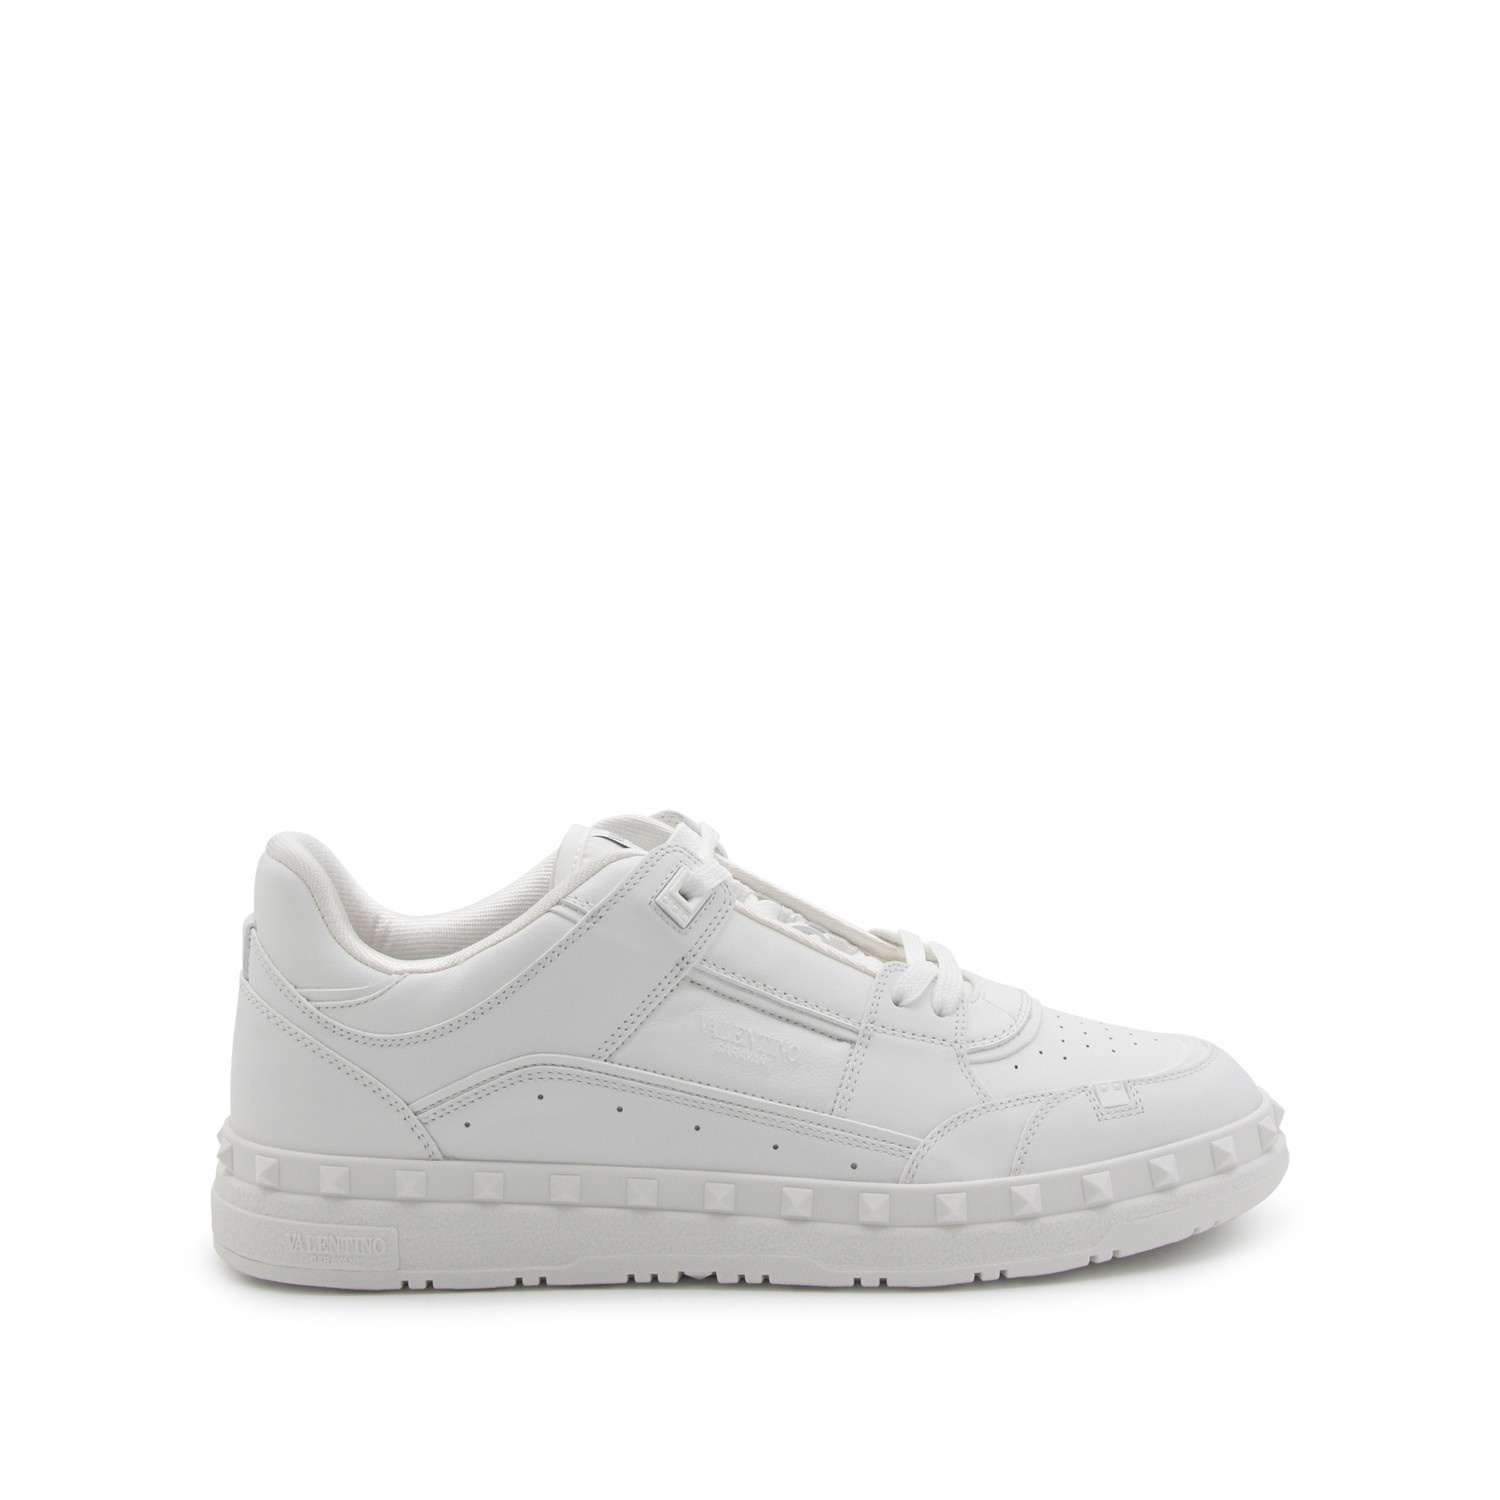 WHITE LEATHER FREEDOTS SNEAKERS - 1